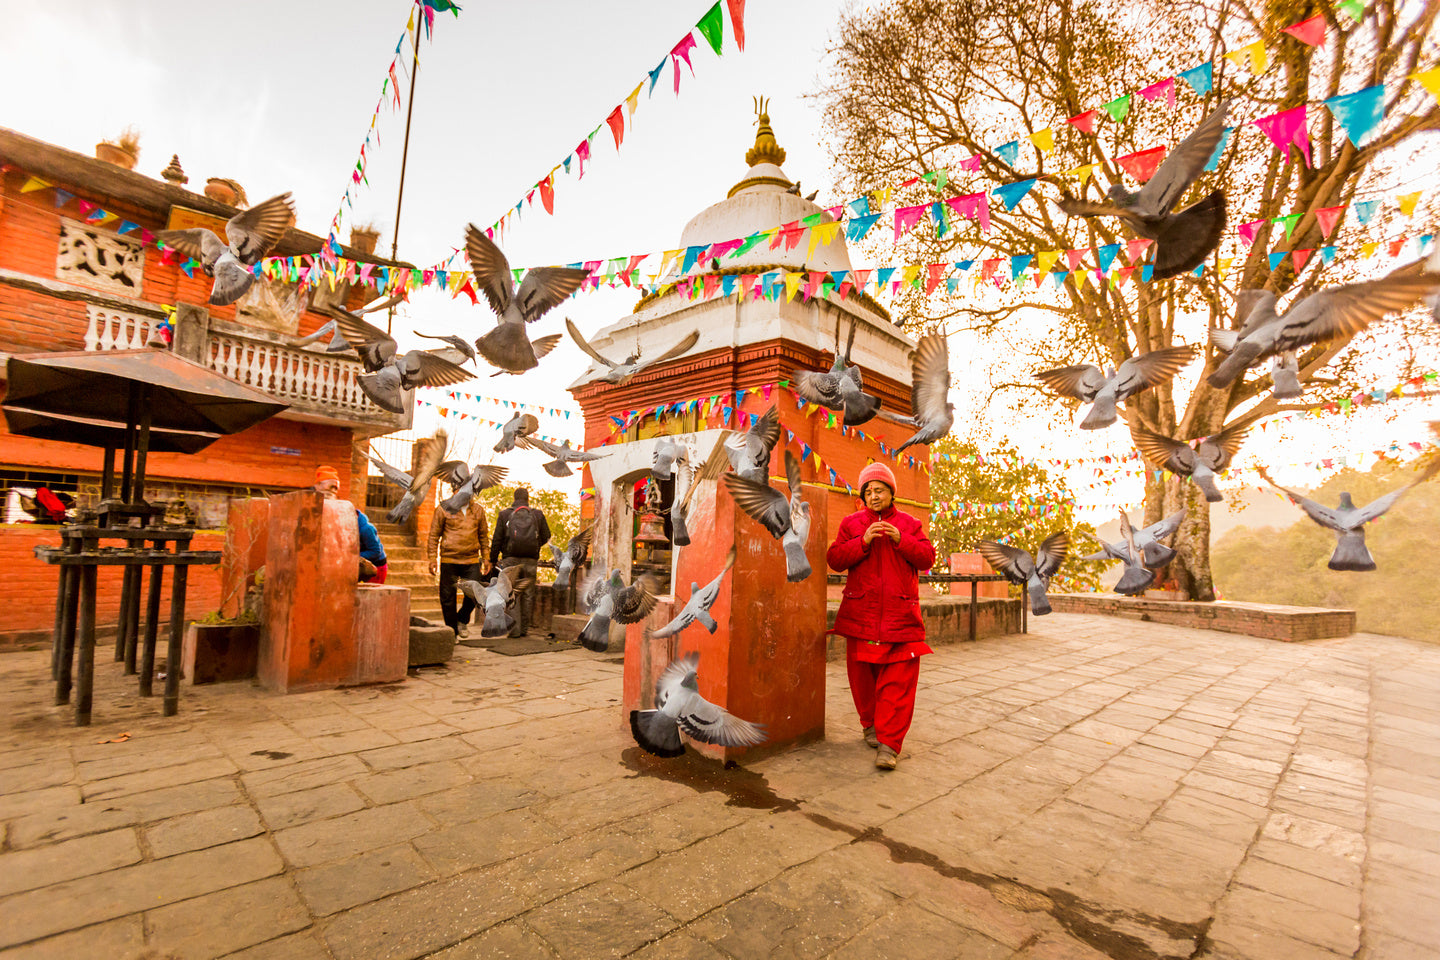 A Square in Nepal - Exotic Landscapes